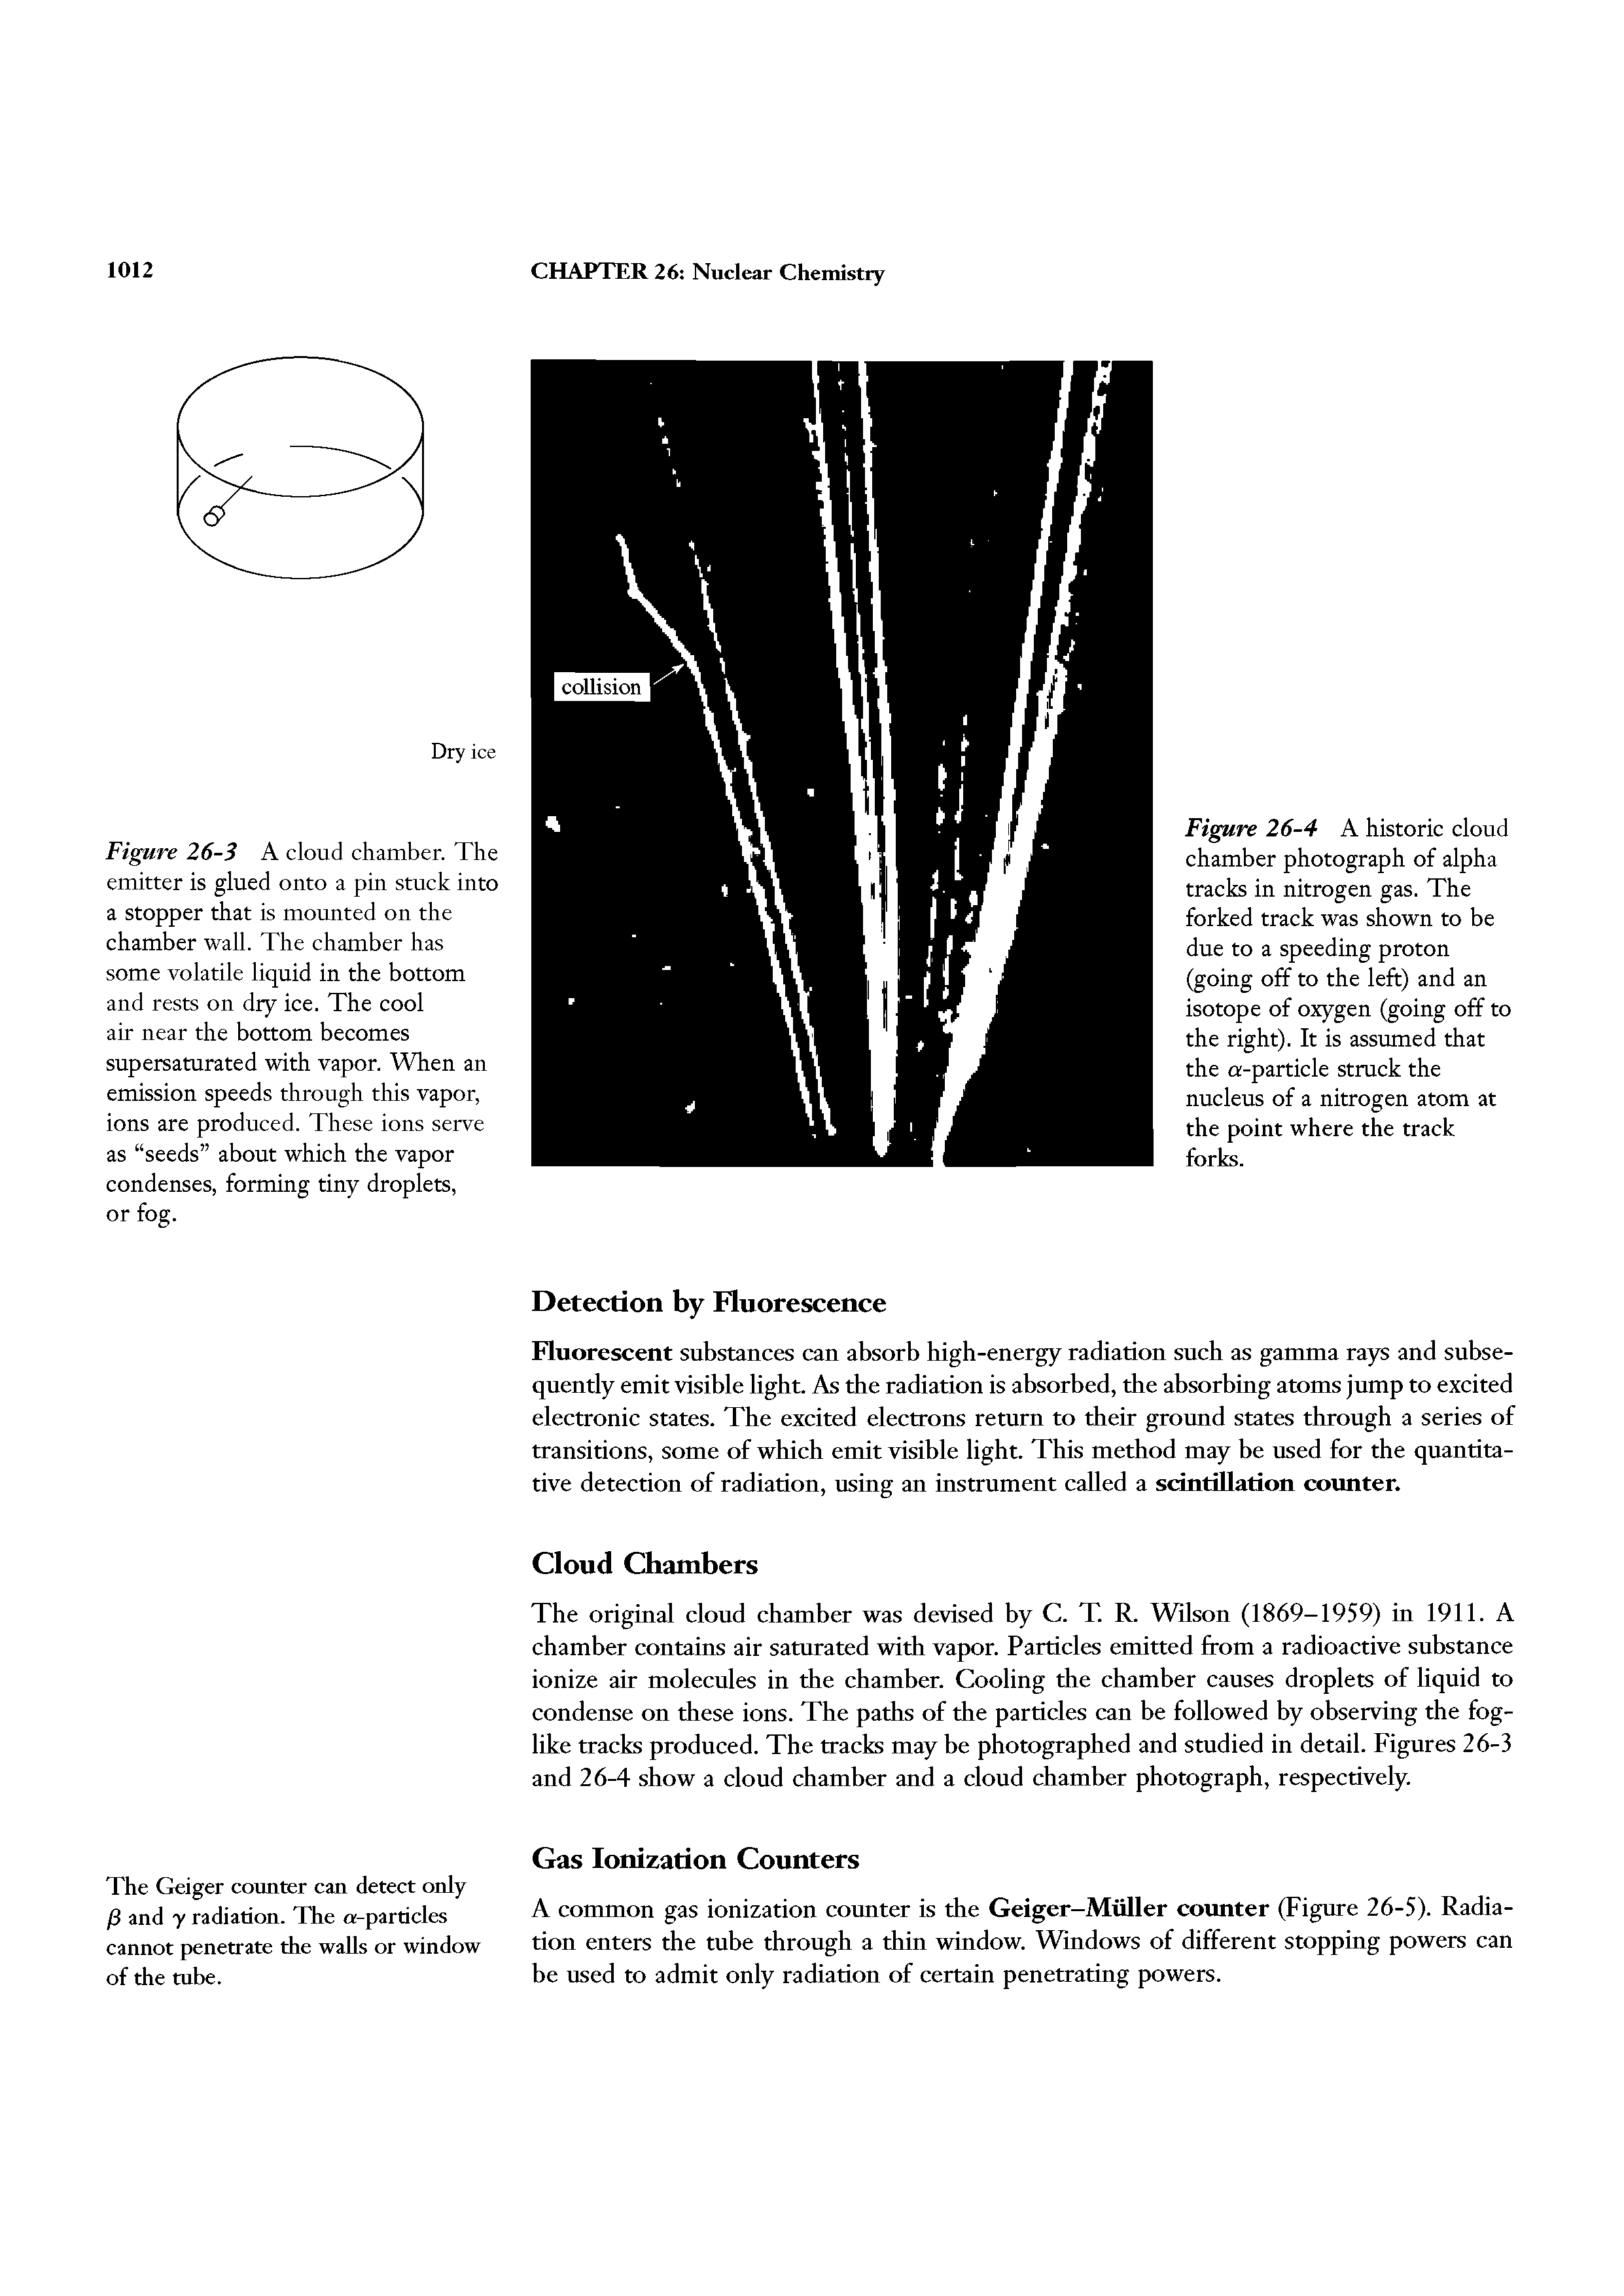 Figure 26-3 A cloud chamber. The emitter is glued onto a pin stuck into a stopper that is mounted on the chamber wall. The chamber has some volatile liquid in the bottom and rests on diy ice. The cool air near the bottom becomes supersaturated with vapor. When an emission speeds through this vapor, ions are produced. These ions serve as seeds about which the vapor condenses, forming tiny droplets, or fog.